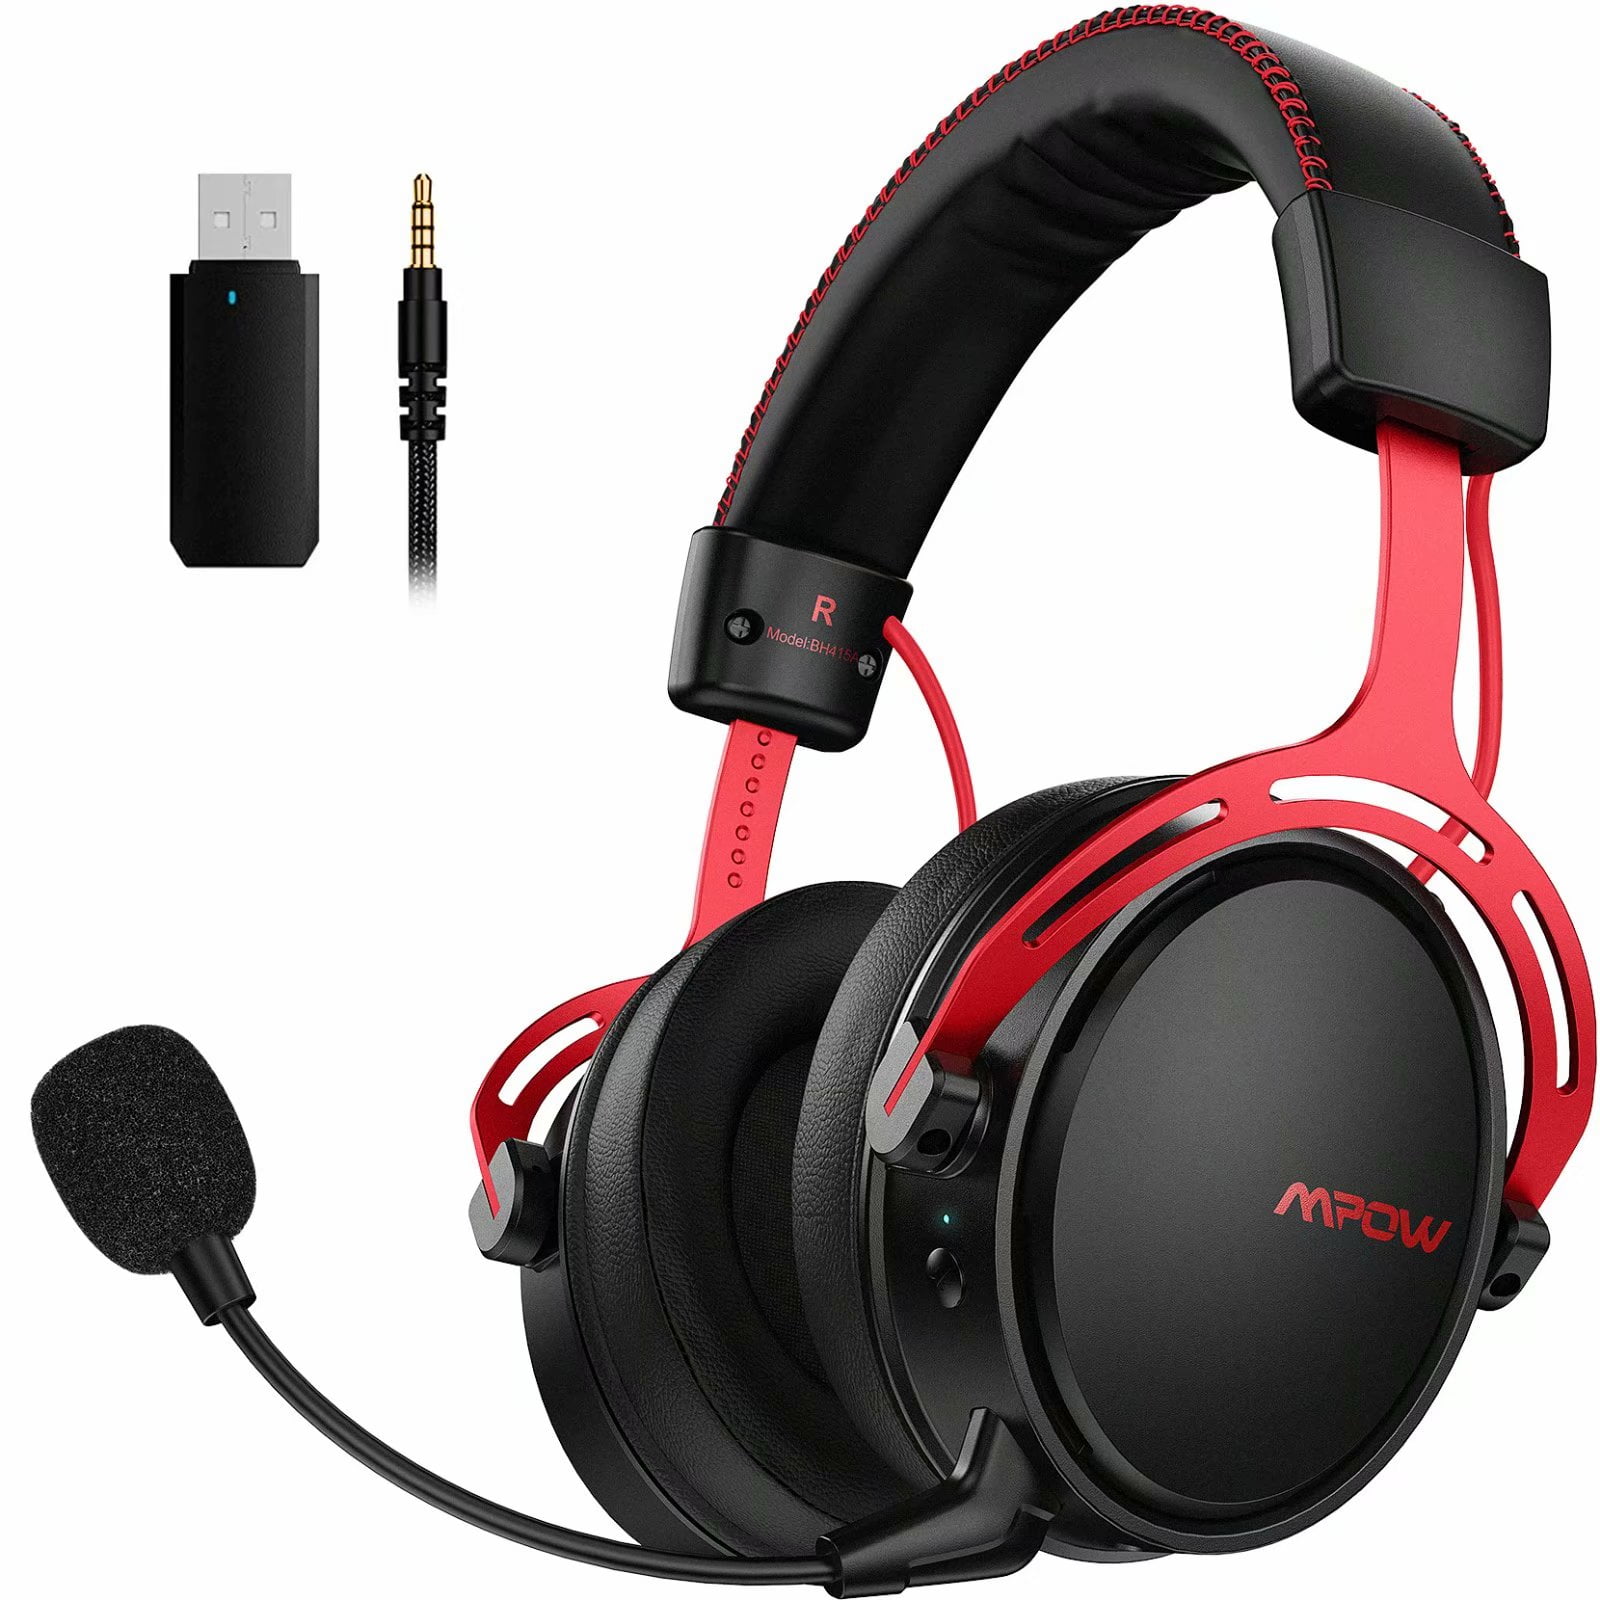 Mpow Air 2 4g Wireless Gaming Headset For Ps4 Pc Computer Headset With Dual Chamber Driver Upto 17 Hours Of Use Noise Cancelling Mic Bass Ultra Light Over Ear Gaming Headphones Red Walmart Com Walmart Com